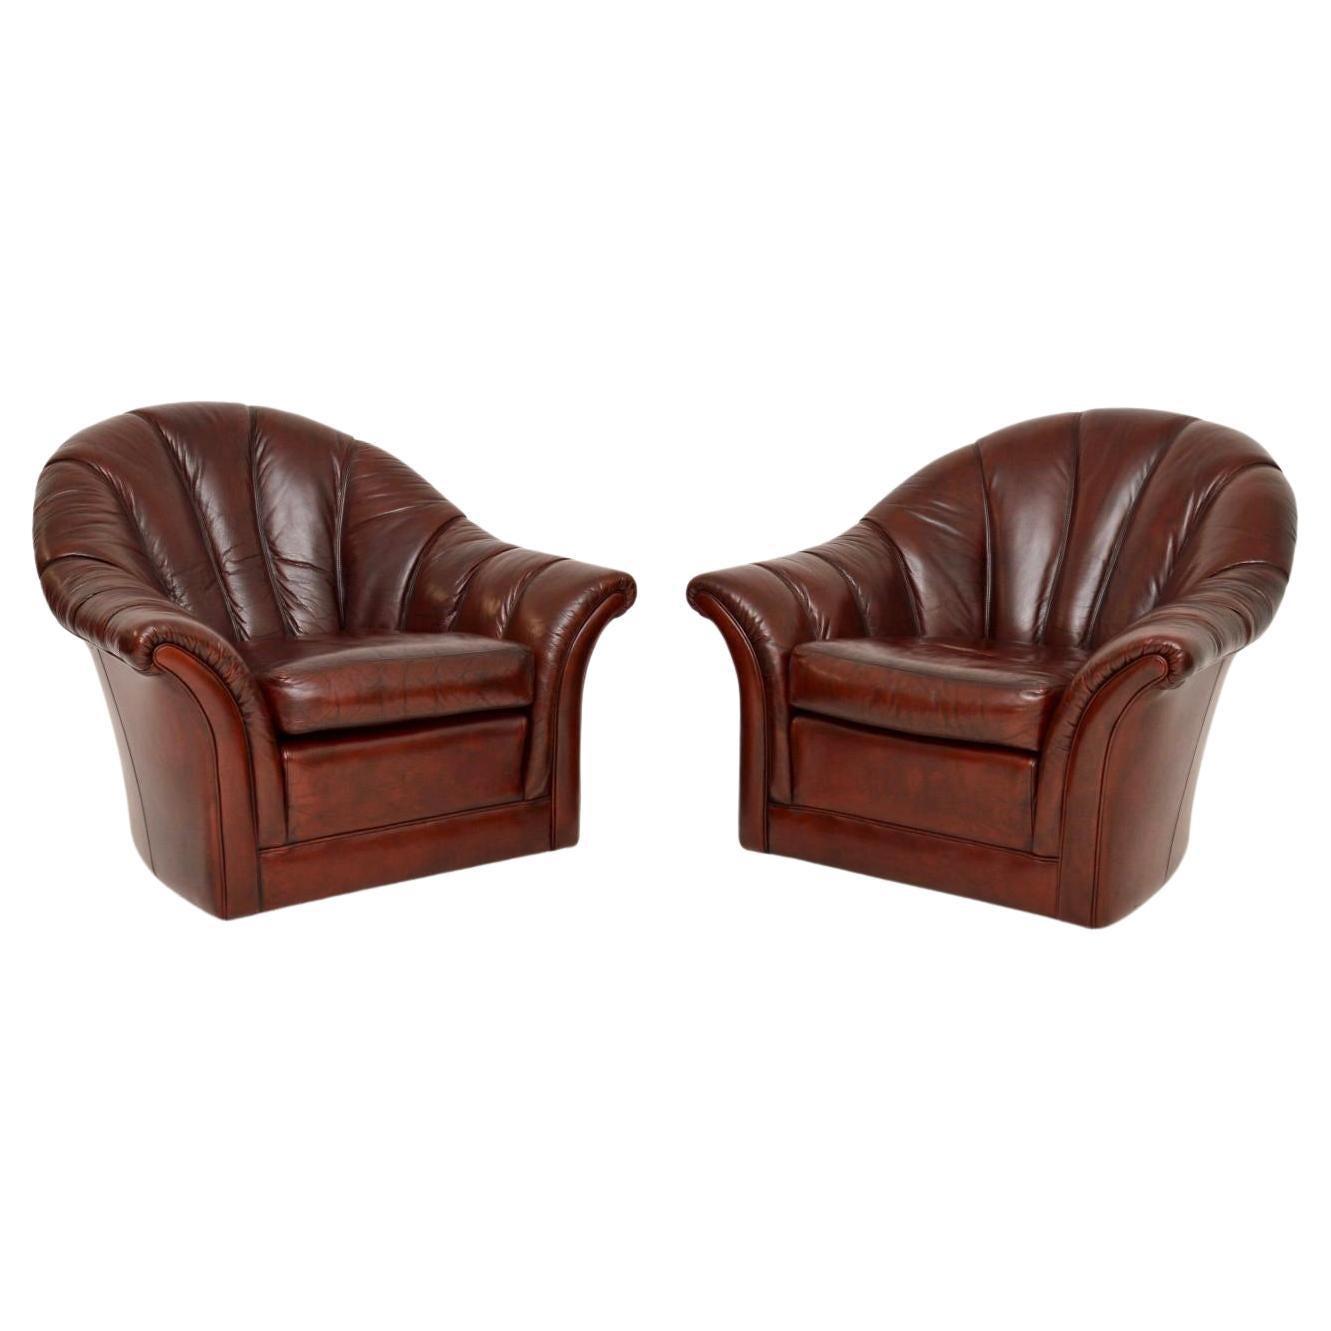 Pair of Vintage Leather Scallop Back Armchairs